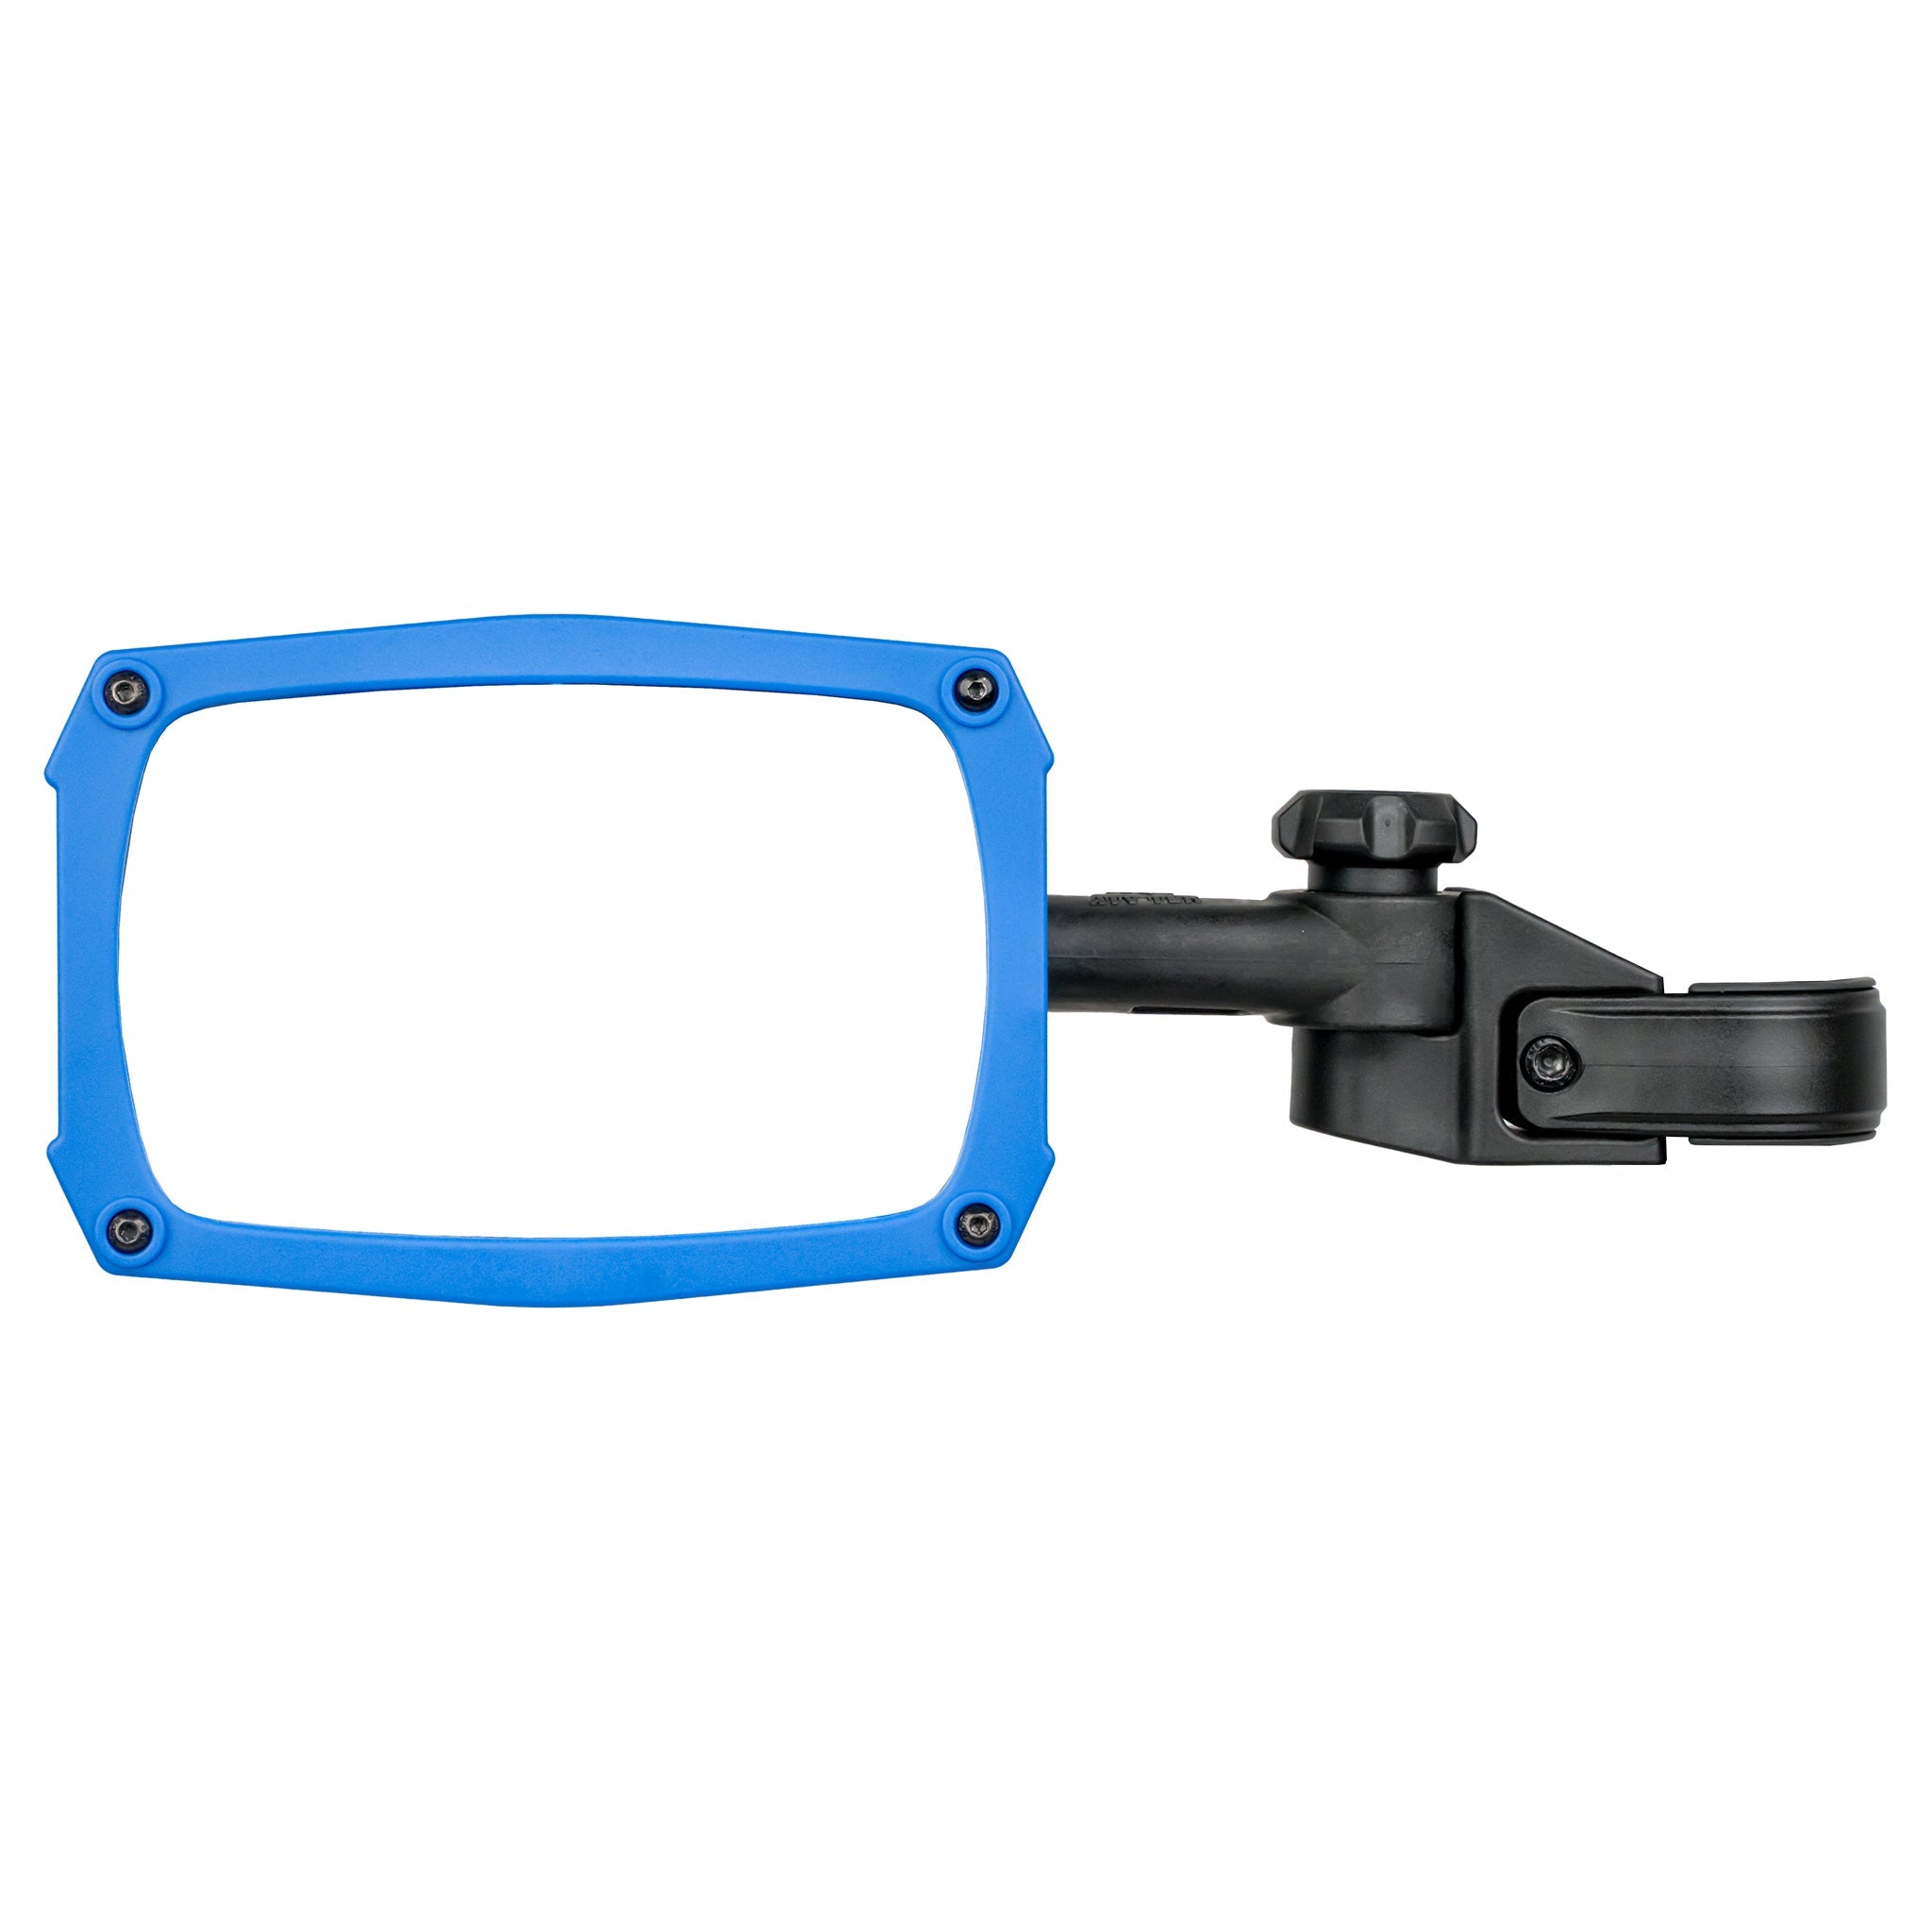 CLEARVIEW™ UTV SIDEVIEW MIRROR - X3, NORTHSTAR - SINGLE